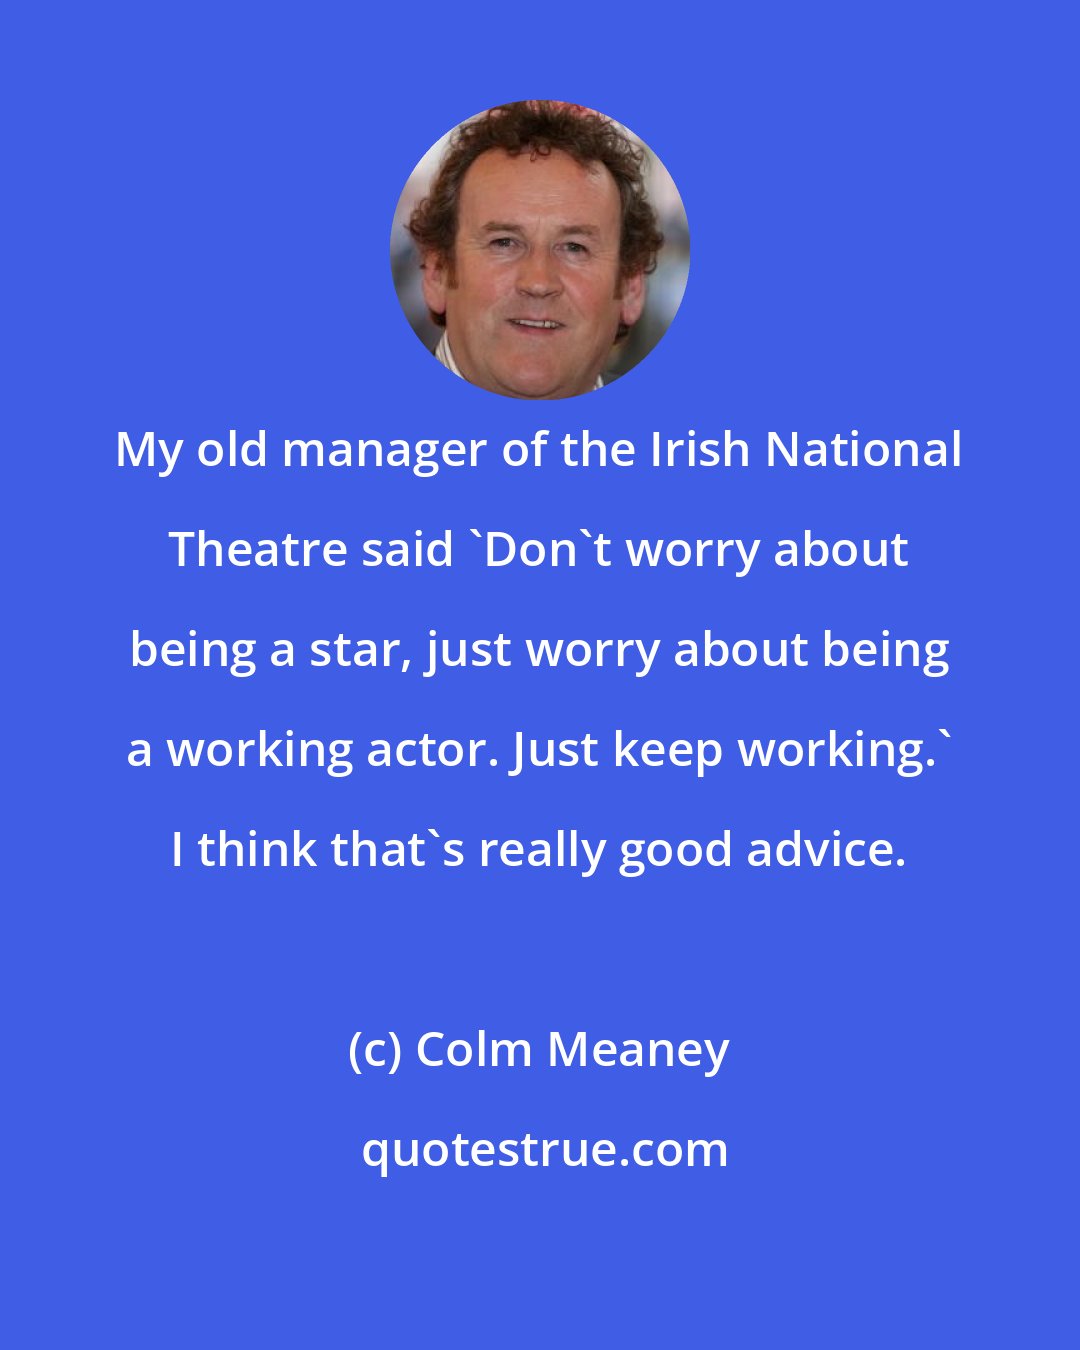 Colm Meaney: My old manager of the Irish National Theatre said 'Don't worry about being a star, just worry about being a working actor. Just keep working.' I think that's really good advice.